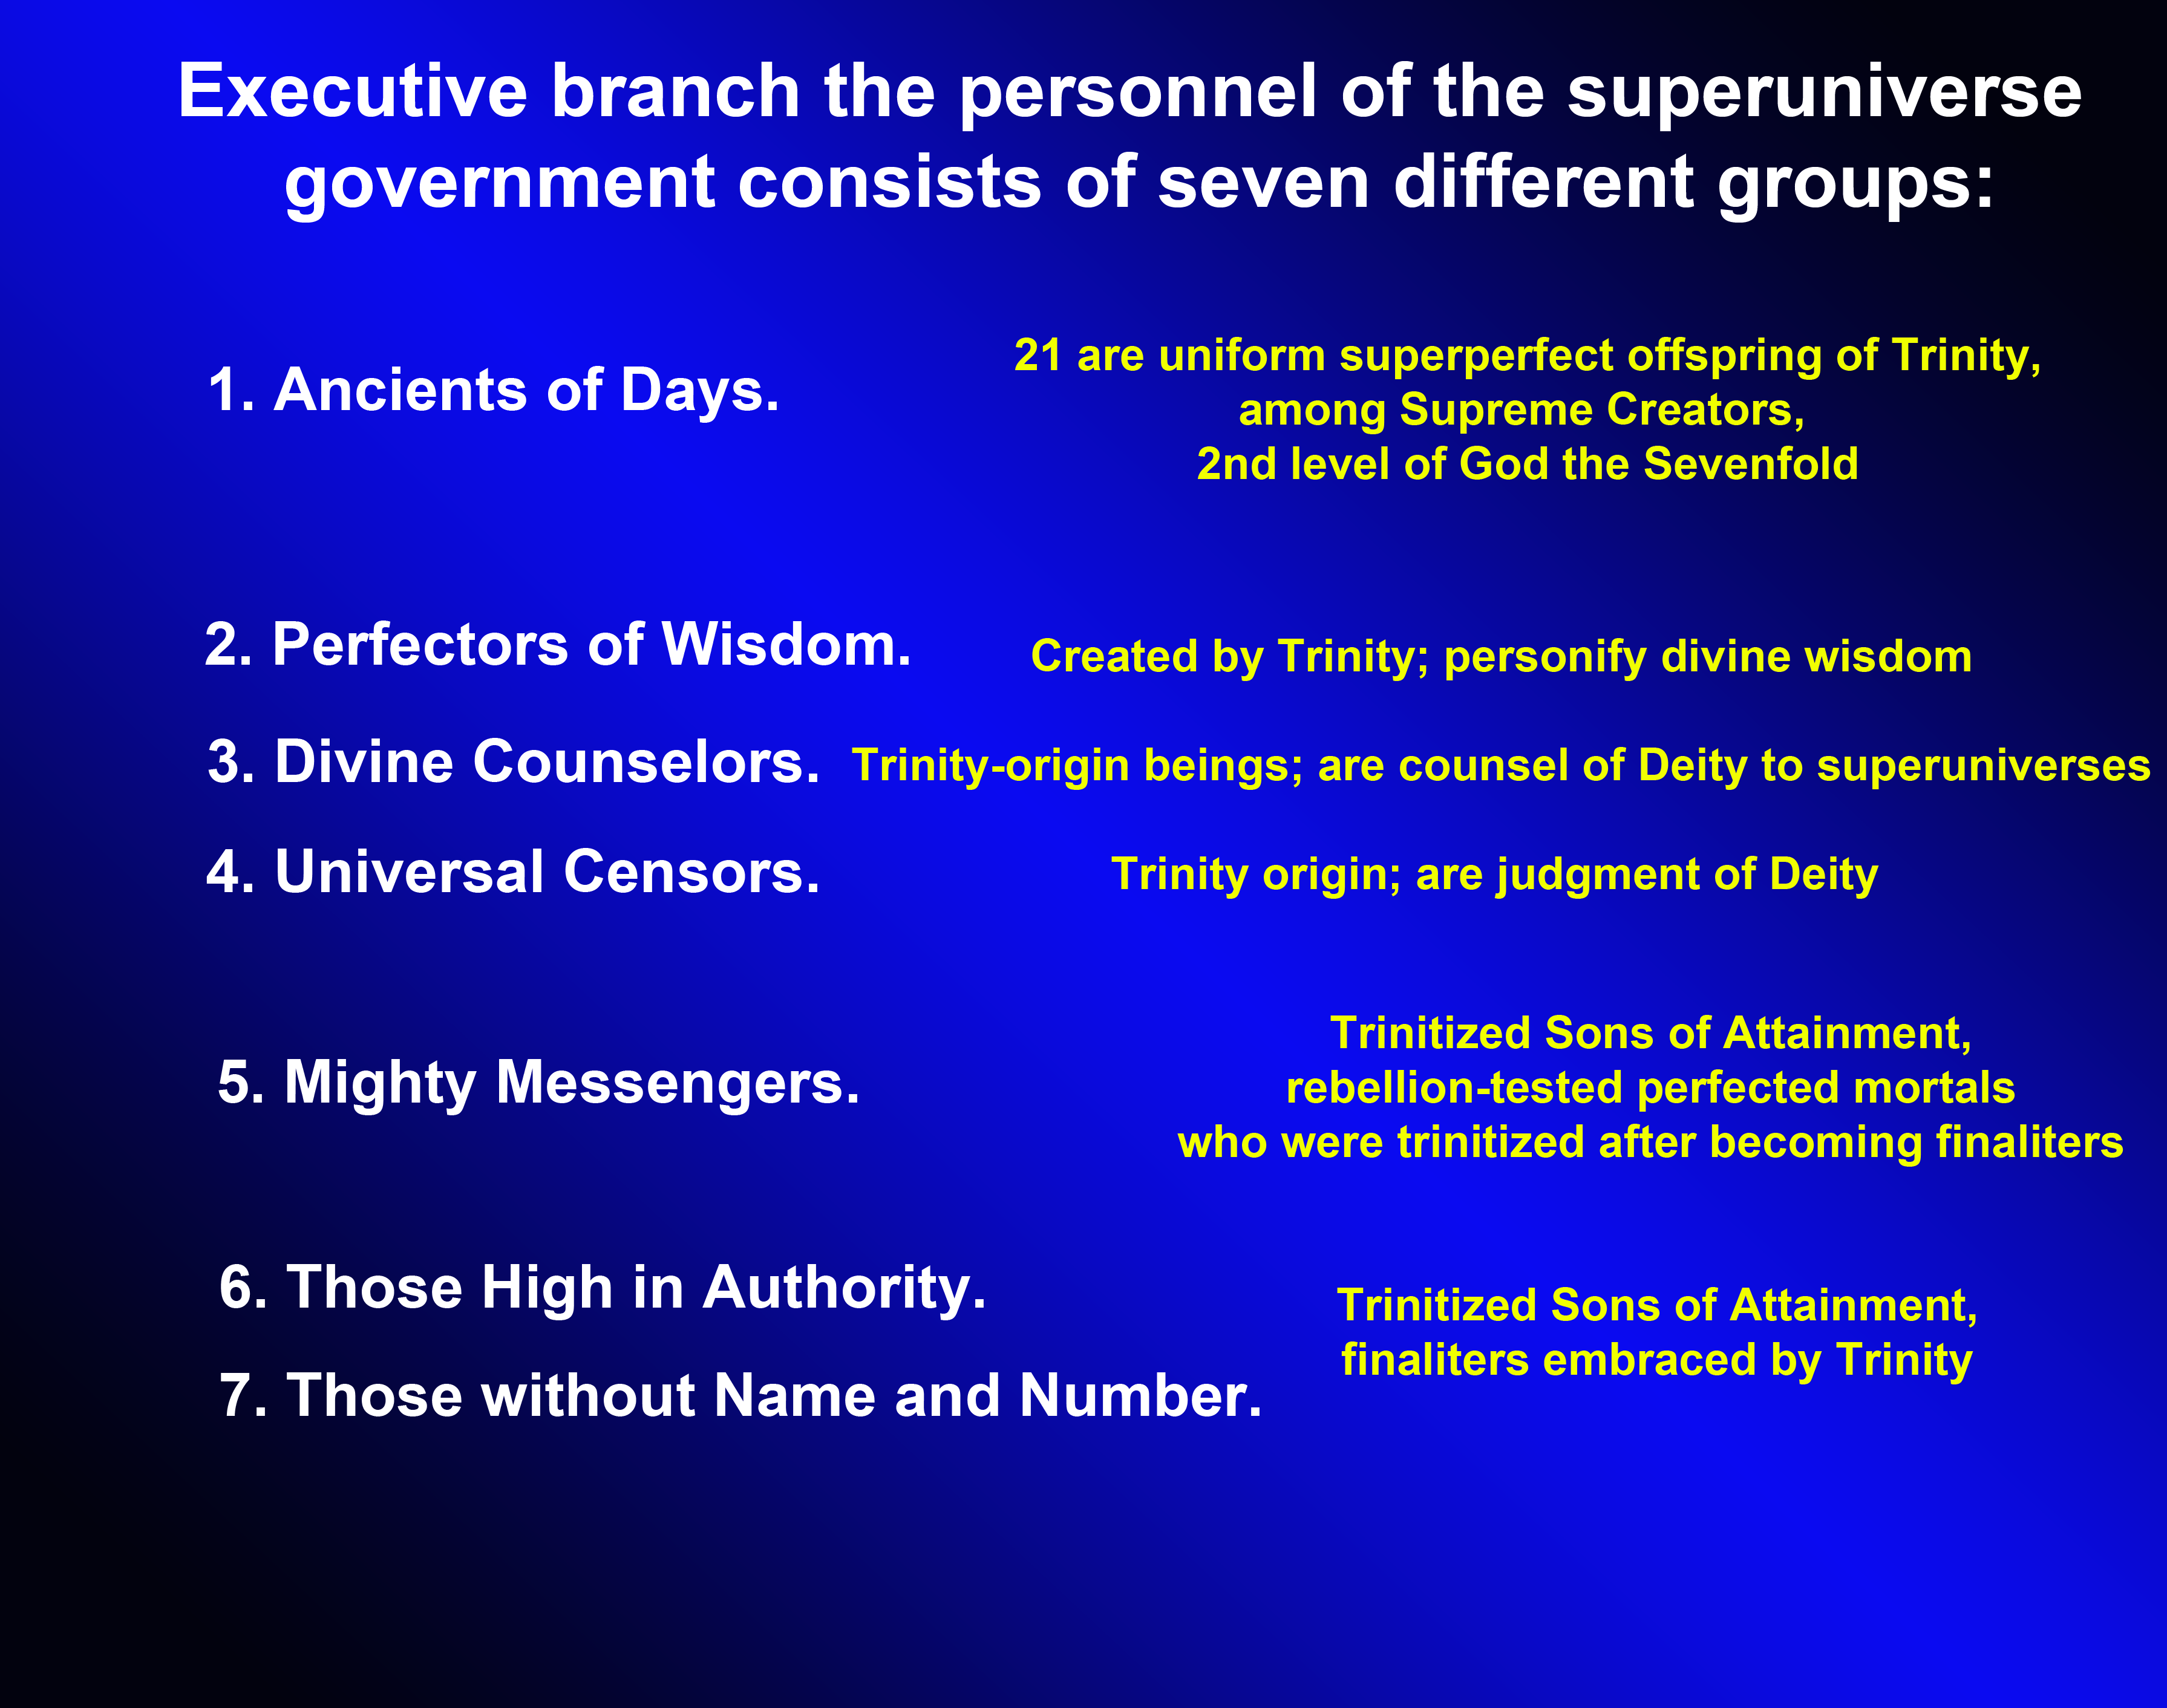 Executive branch of the superuniverse government